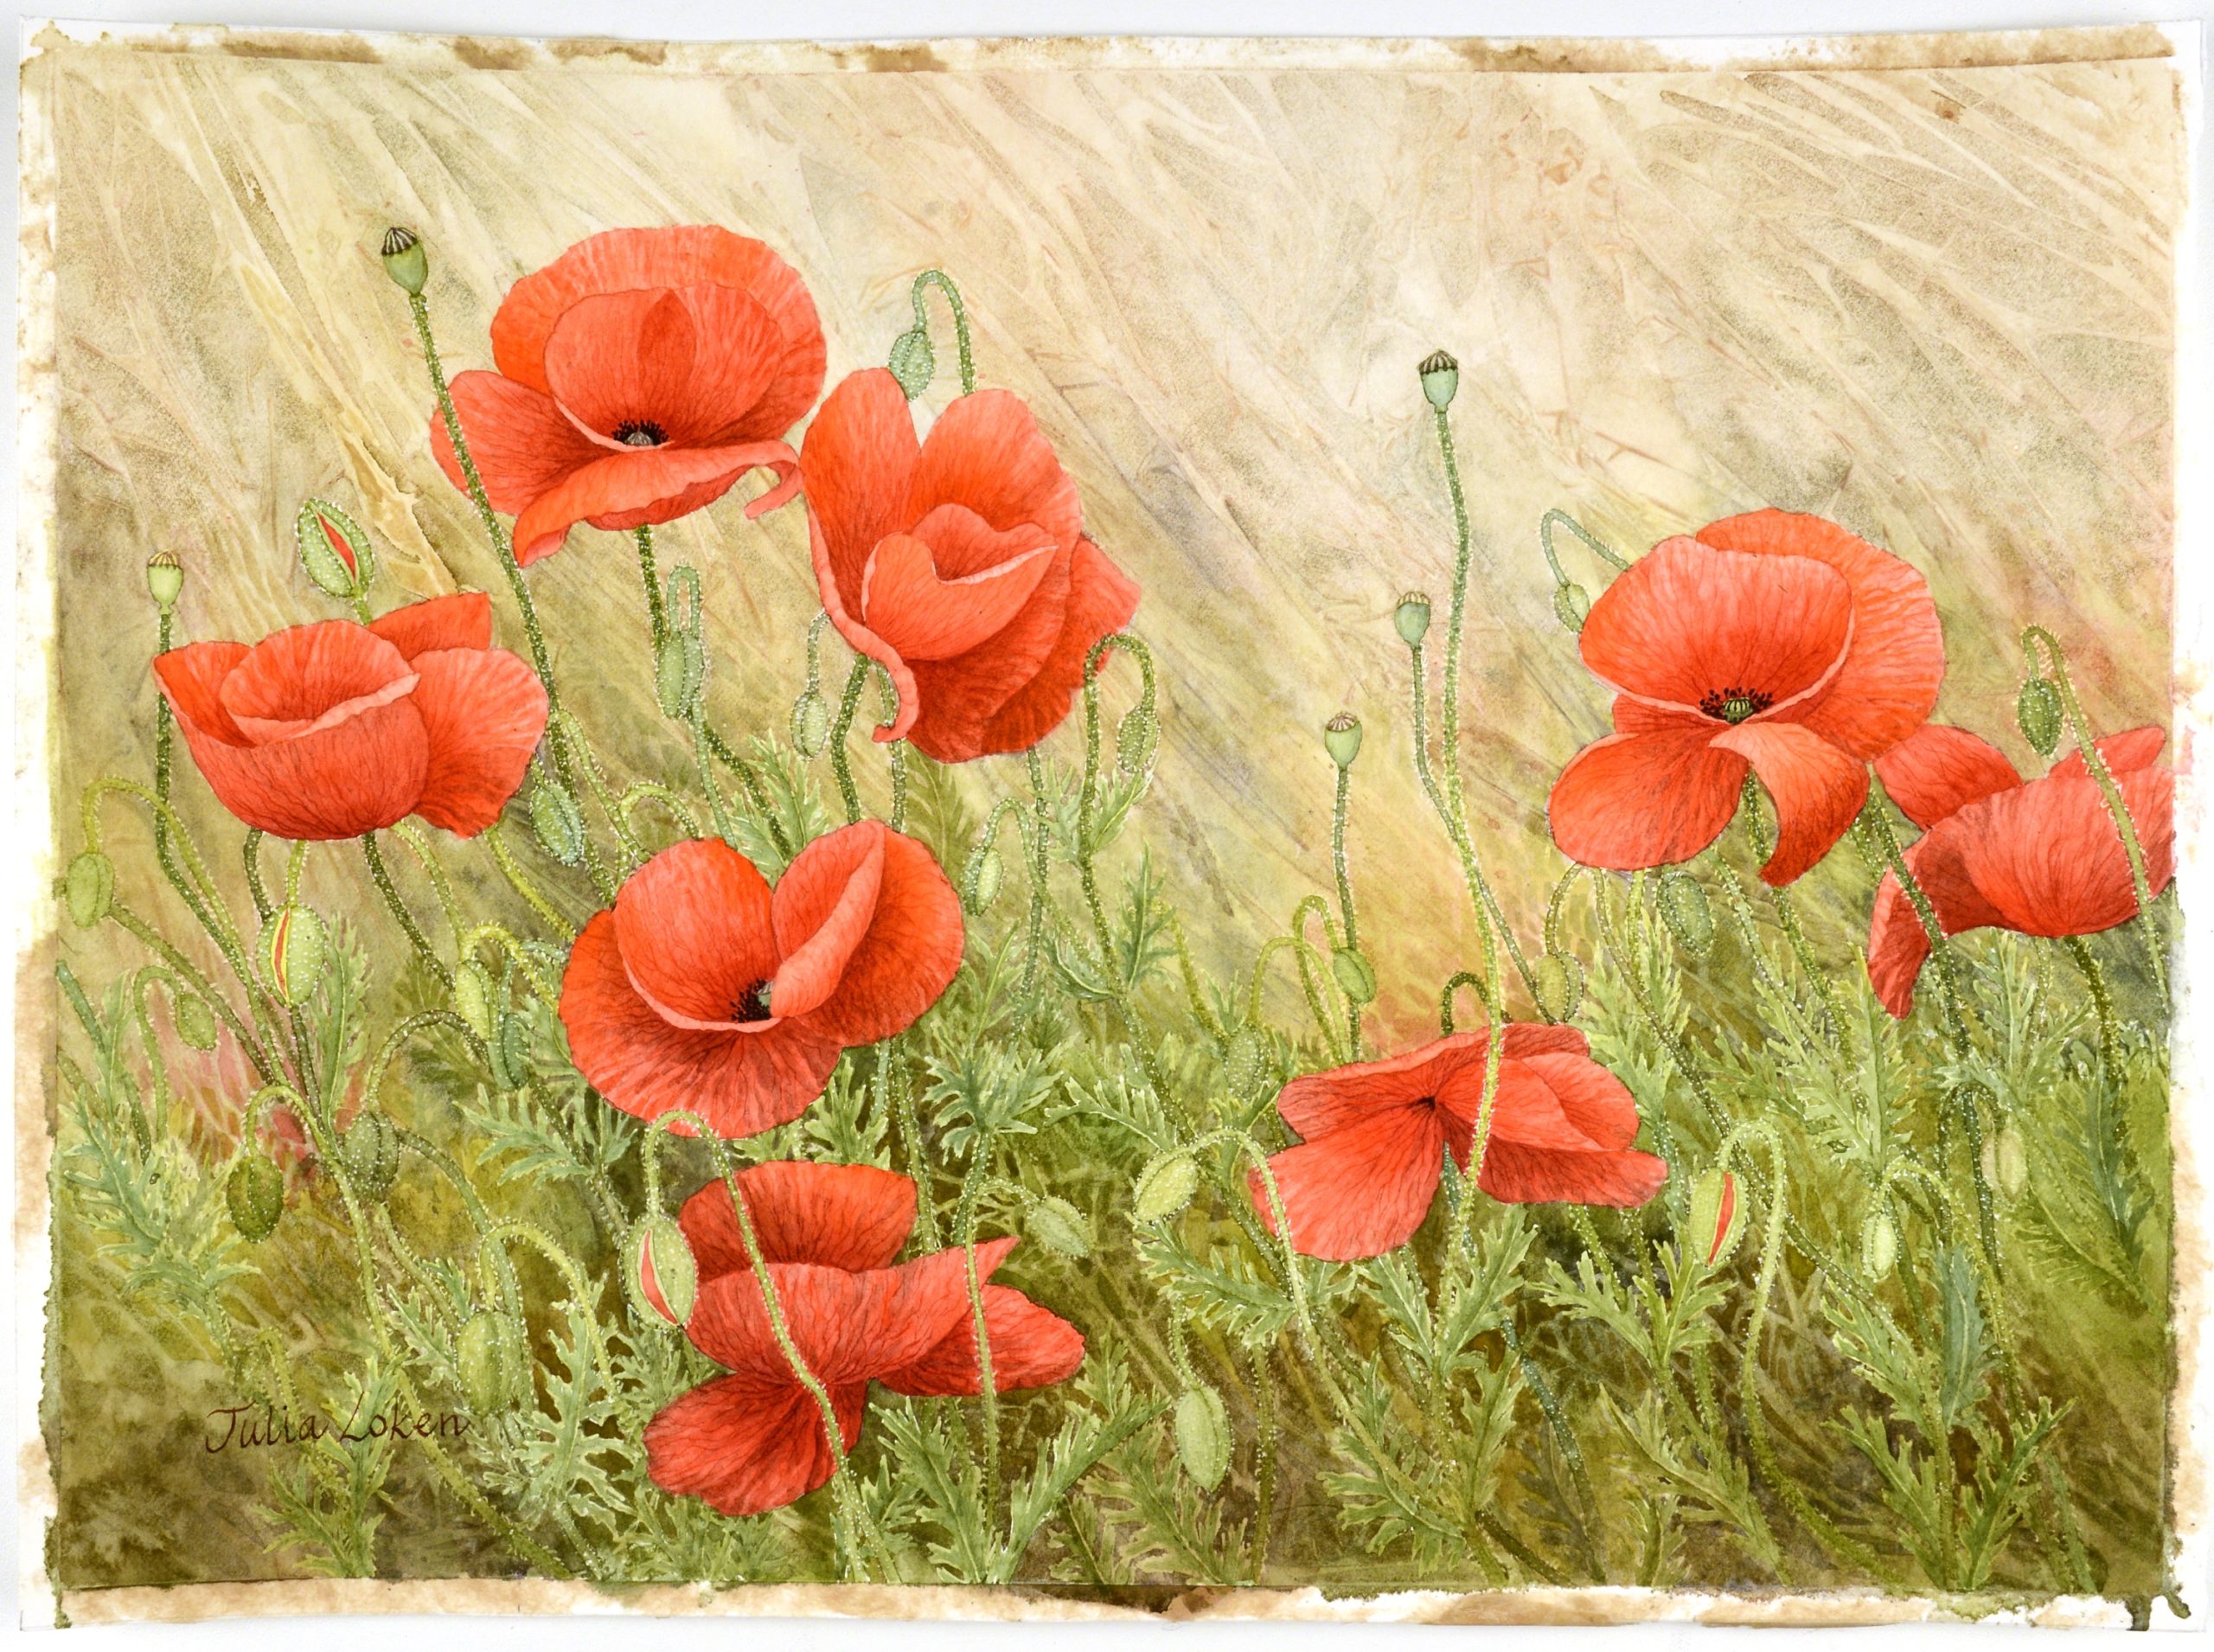 
		                					Julia Loken		                																	
																											<i>Wild Poppies,</i>  
																																																					watercolor on paper, 
																																								10 x 14 inches 
																								
		                				